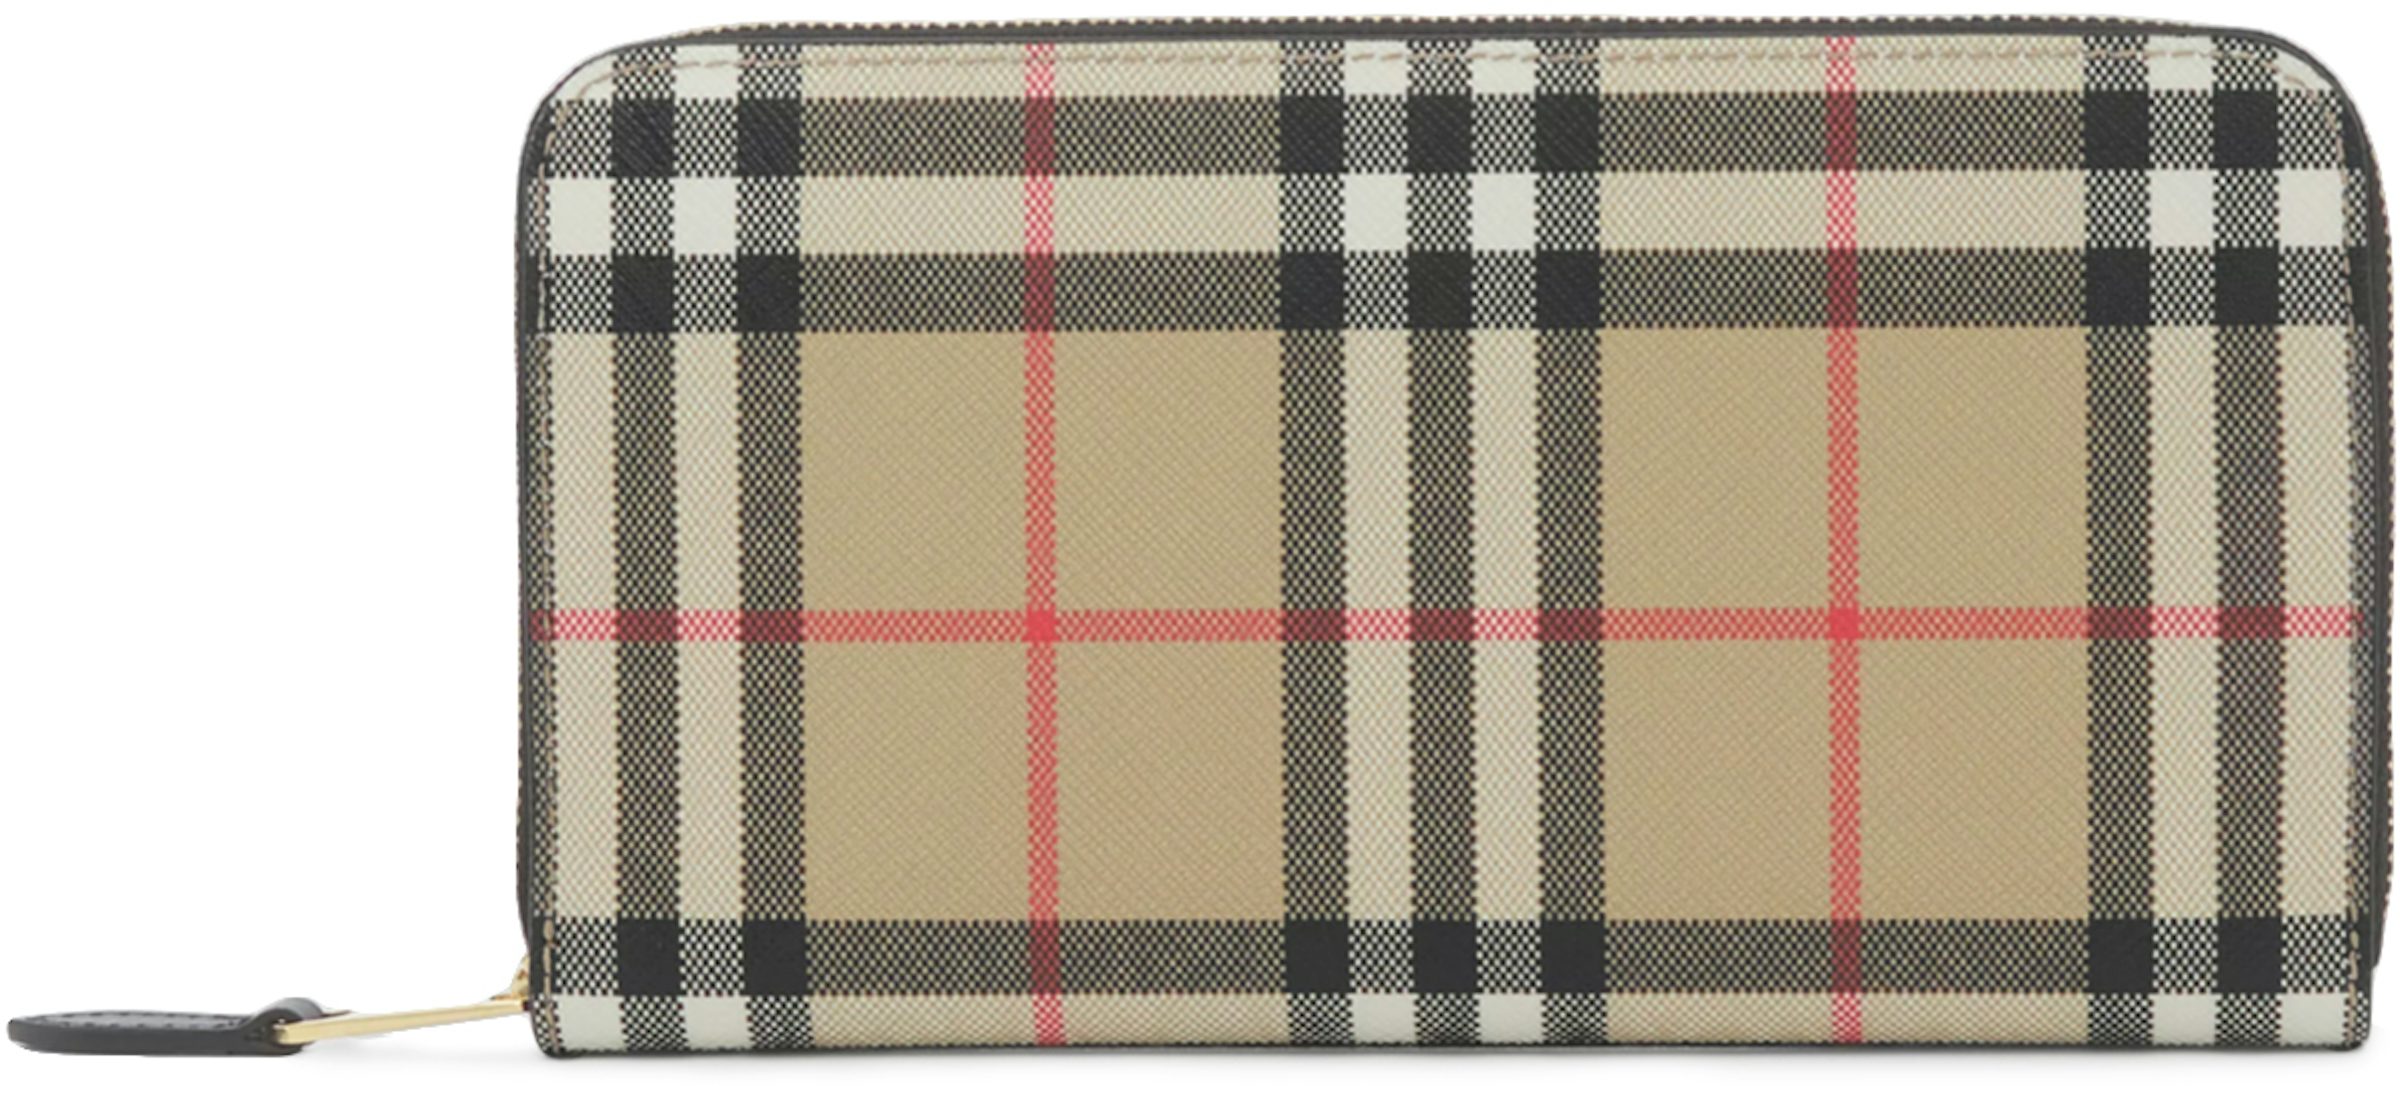 Burberry Vintage Check and Leather (12 Card Slot) Wallet Archive Beige/Black in Polyurethane with - US